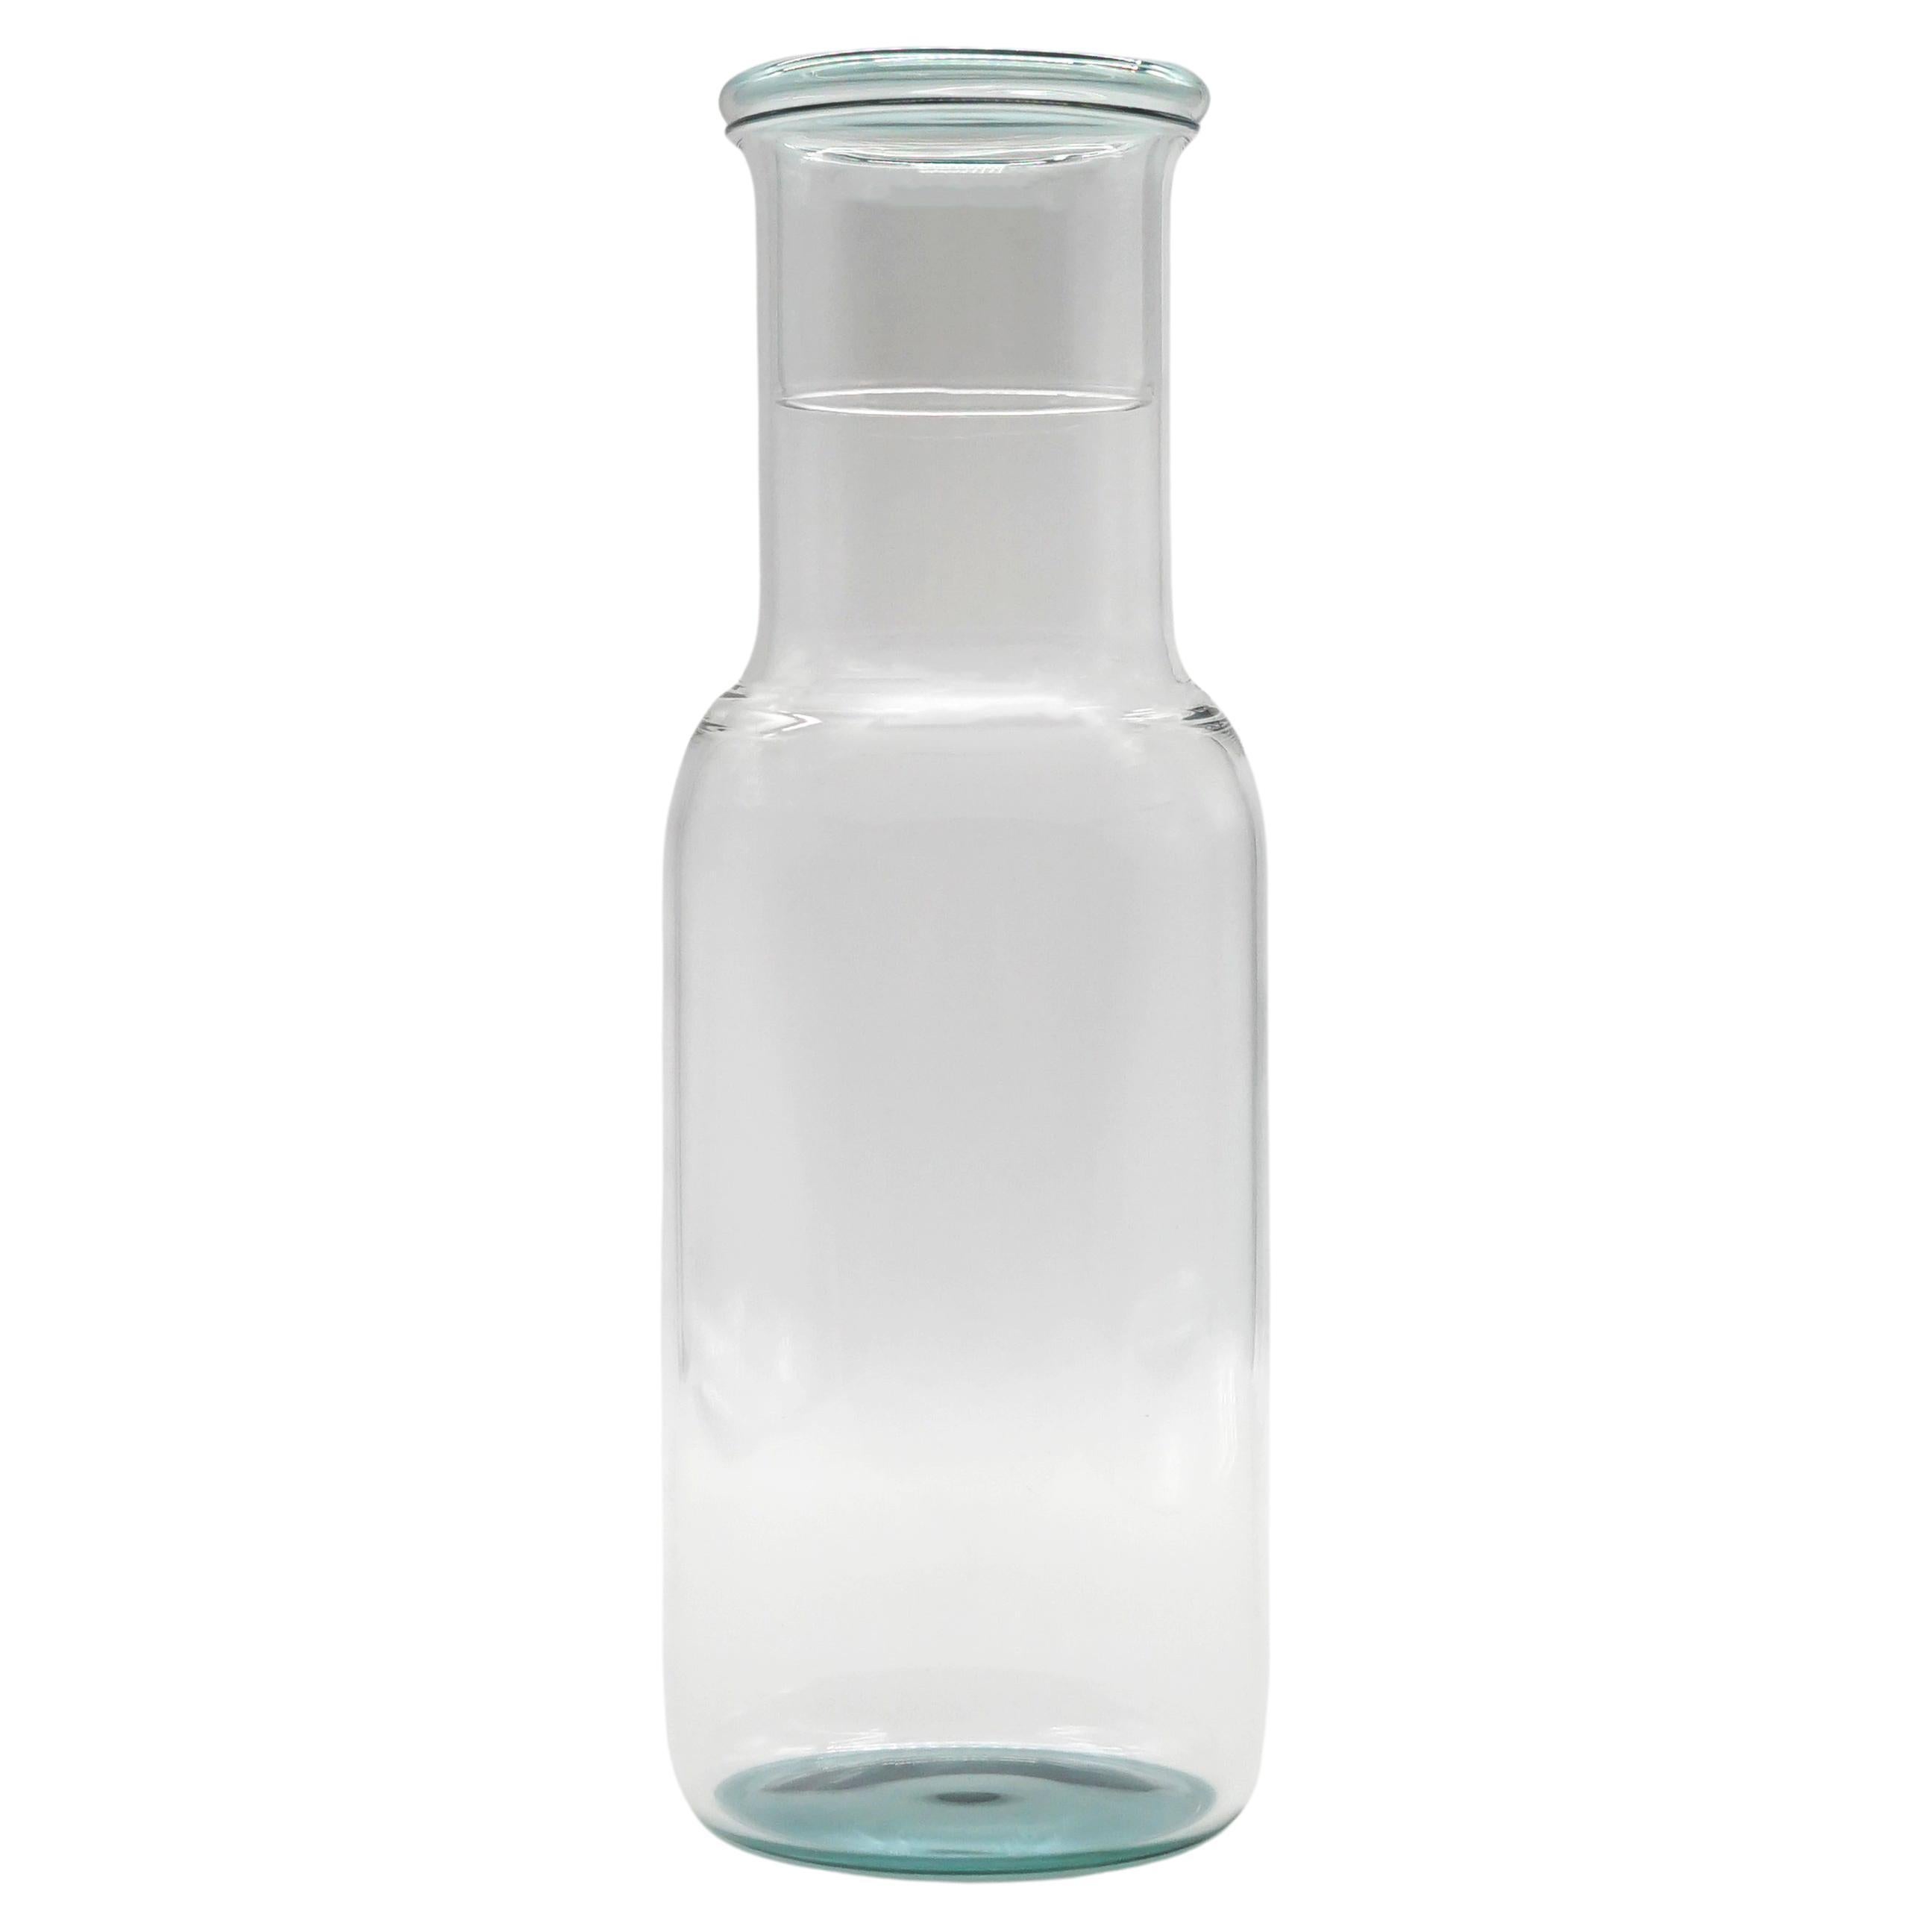 21st Century Glass Bottle Iride, Green Color, Kanz Architetti For Sale